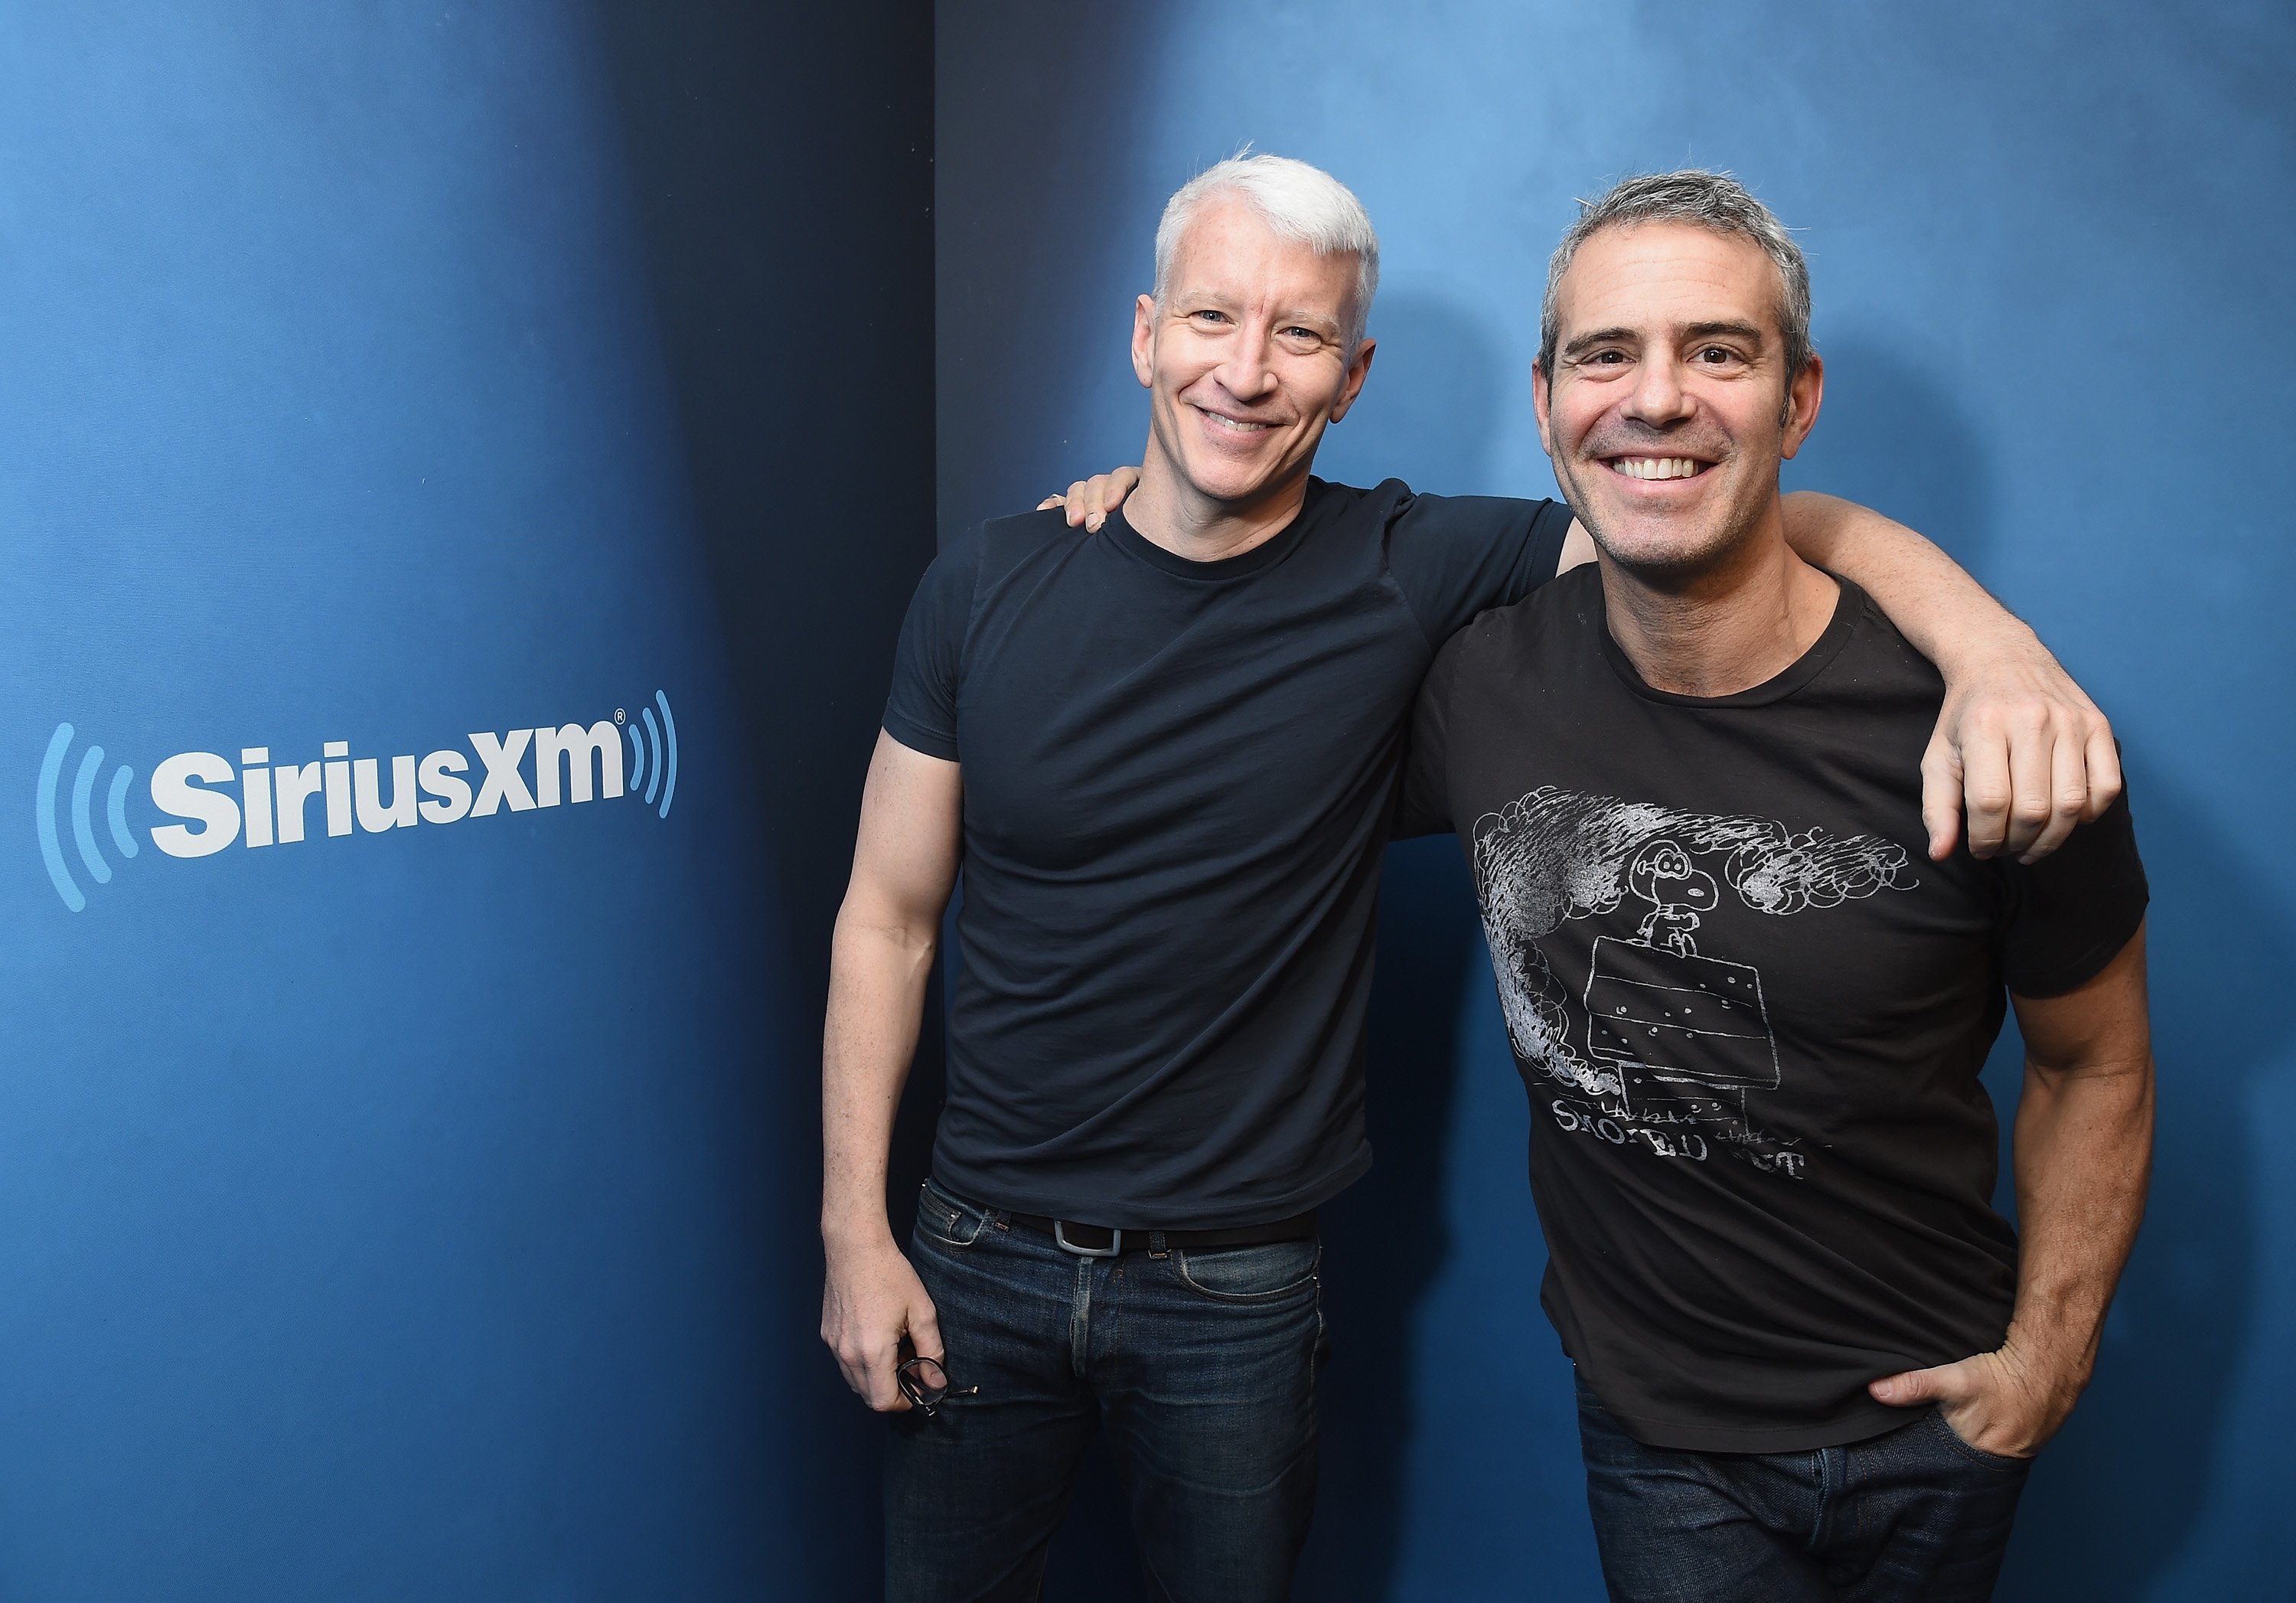 Anderson Cooper and Andy Cohen at Sirius XM Studios, 2917, New York City. | Photo: Getty Images